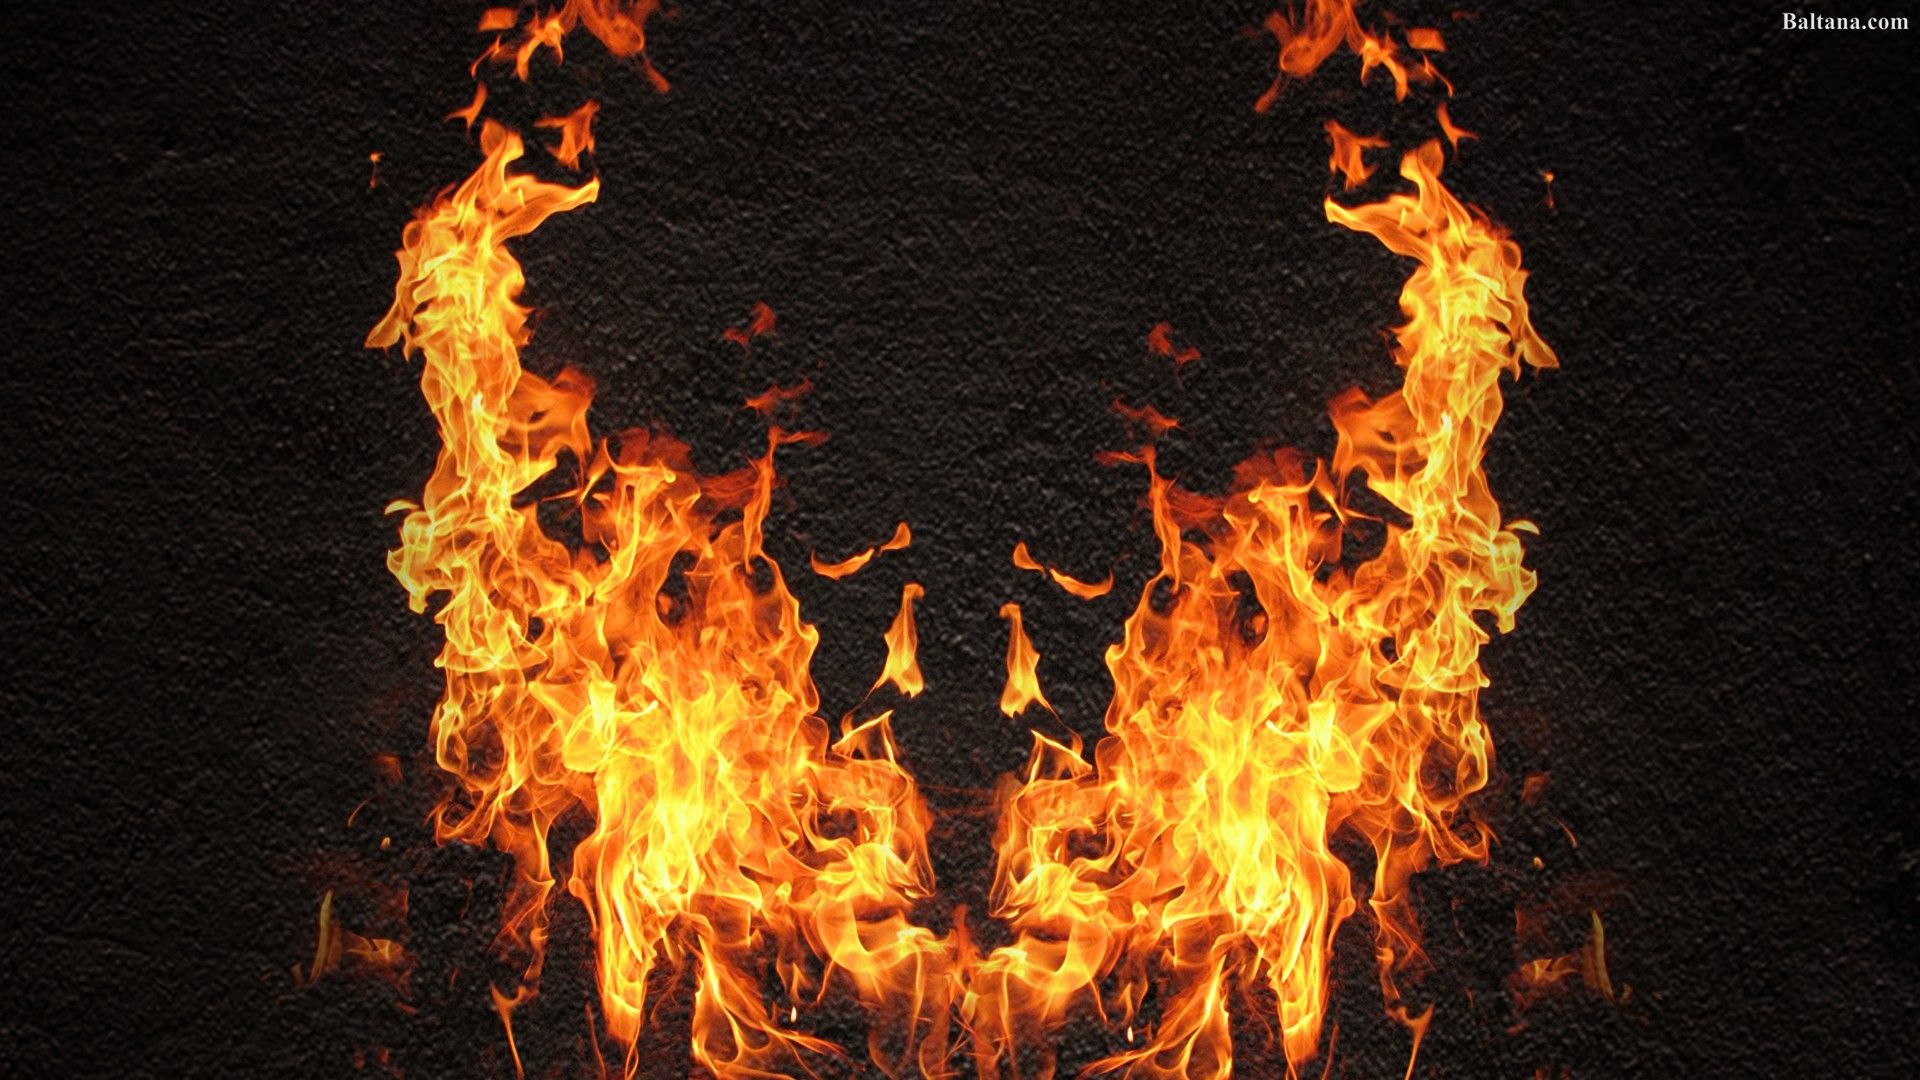 Download Hellfire wallpapers for mobile phone free Hellfire HD pictures